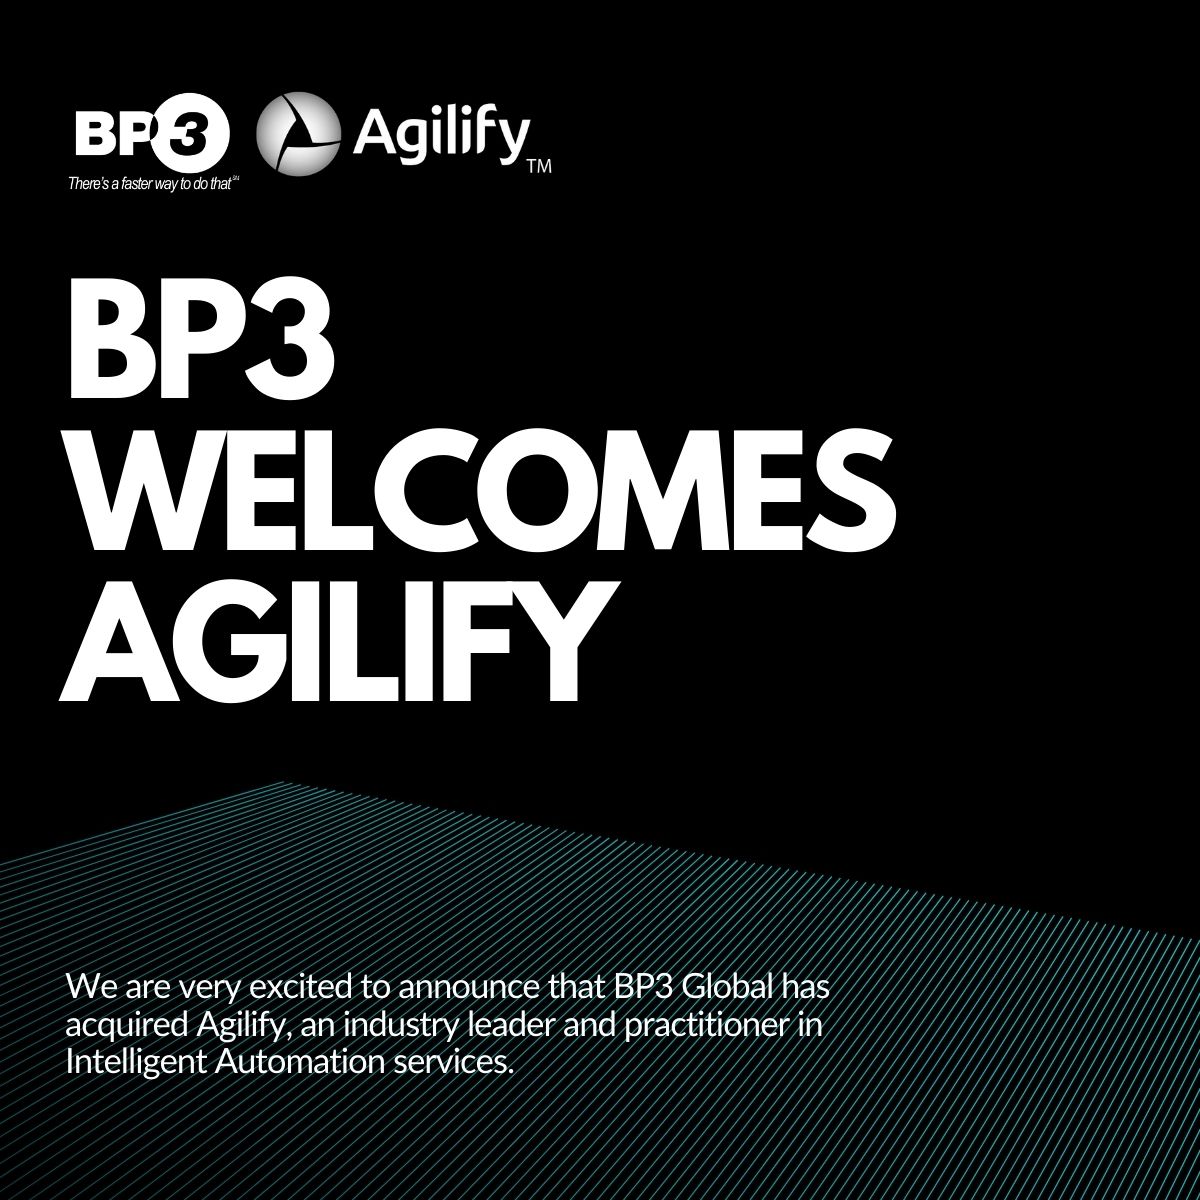 Thoughts from the CEO: Agilify is Joining the BP3 Team